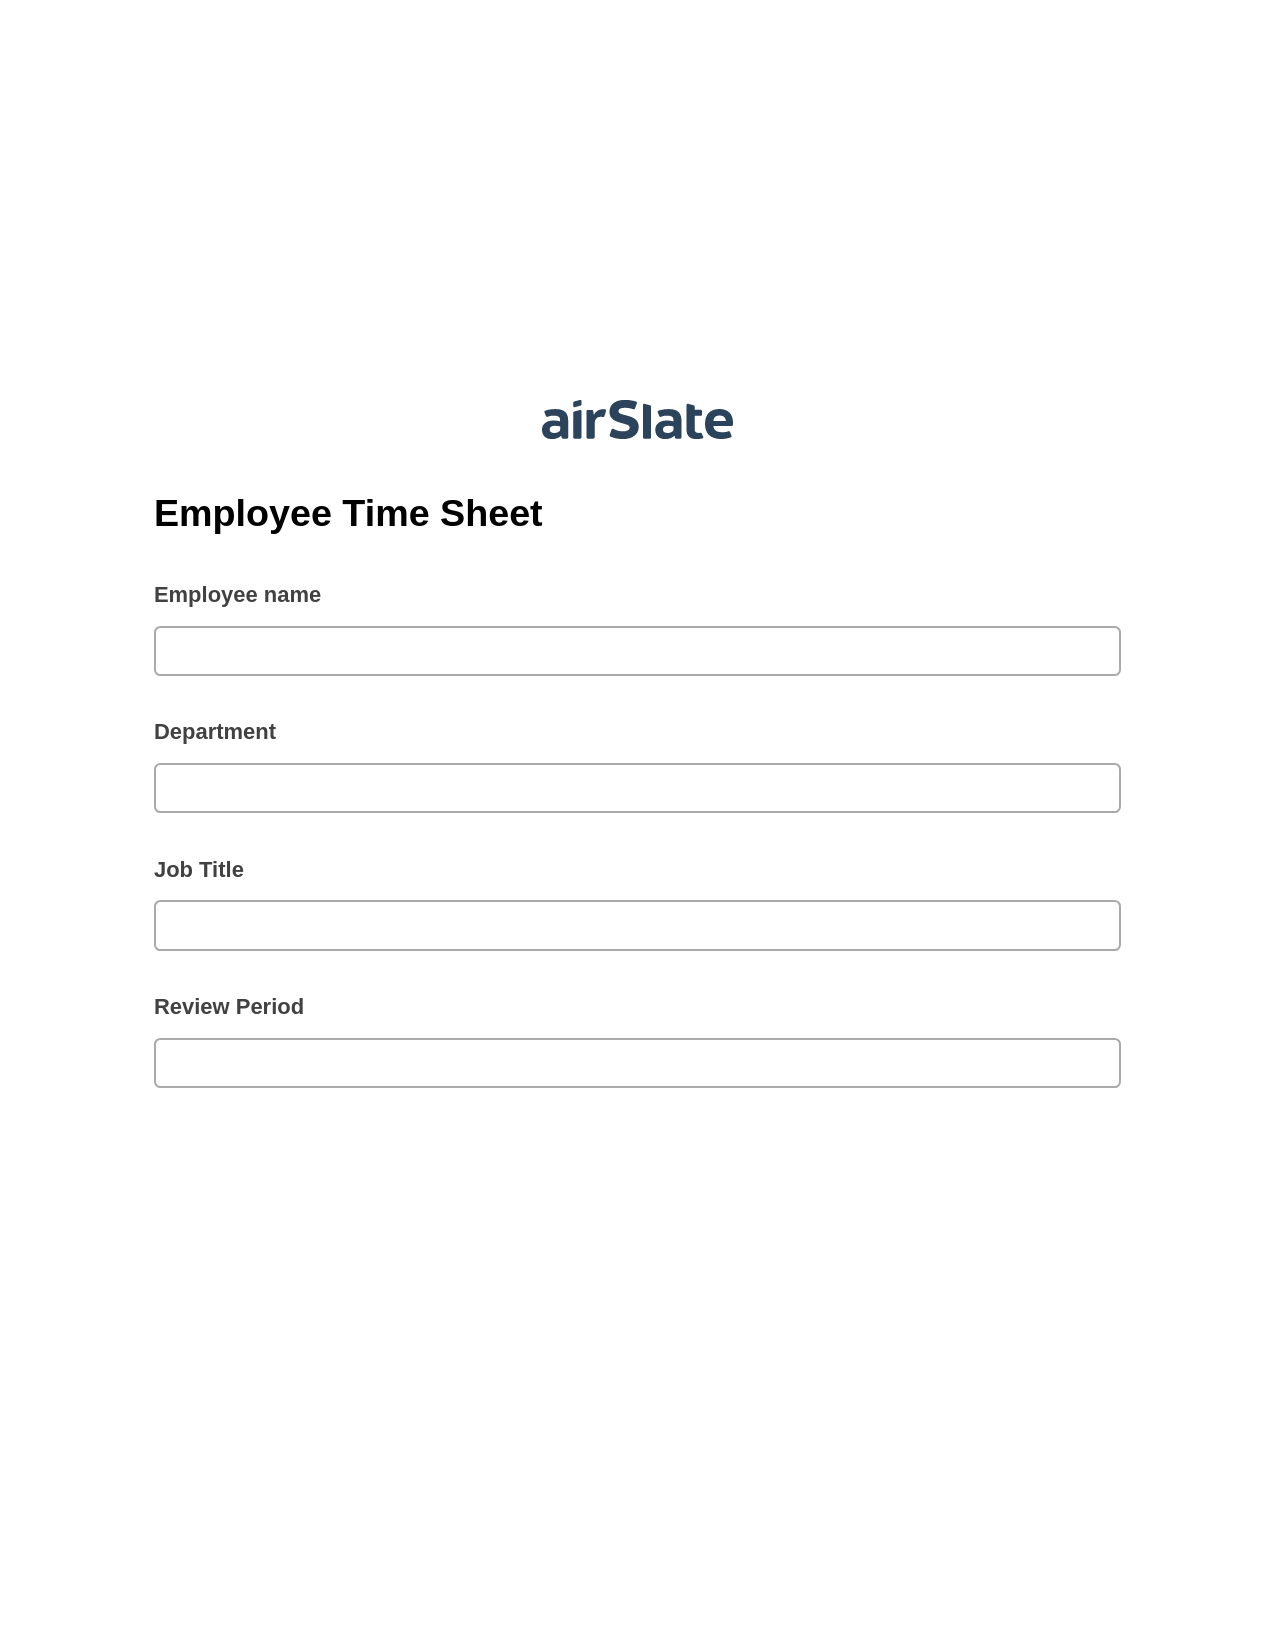 Employee Time Sheet Pre-fill Dropdowns from CSV file Bot, Update Audit Trail Bot, Archive to Google Drive Bot